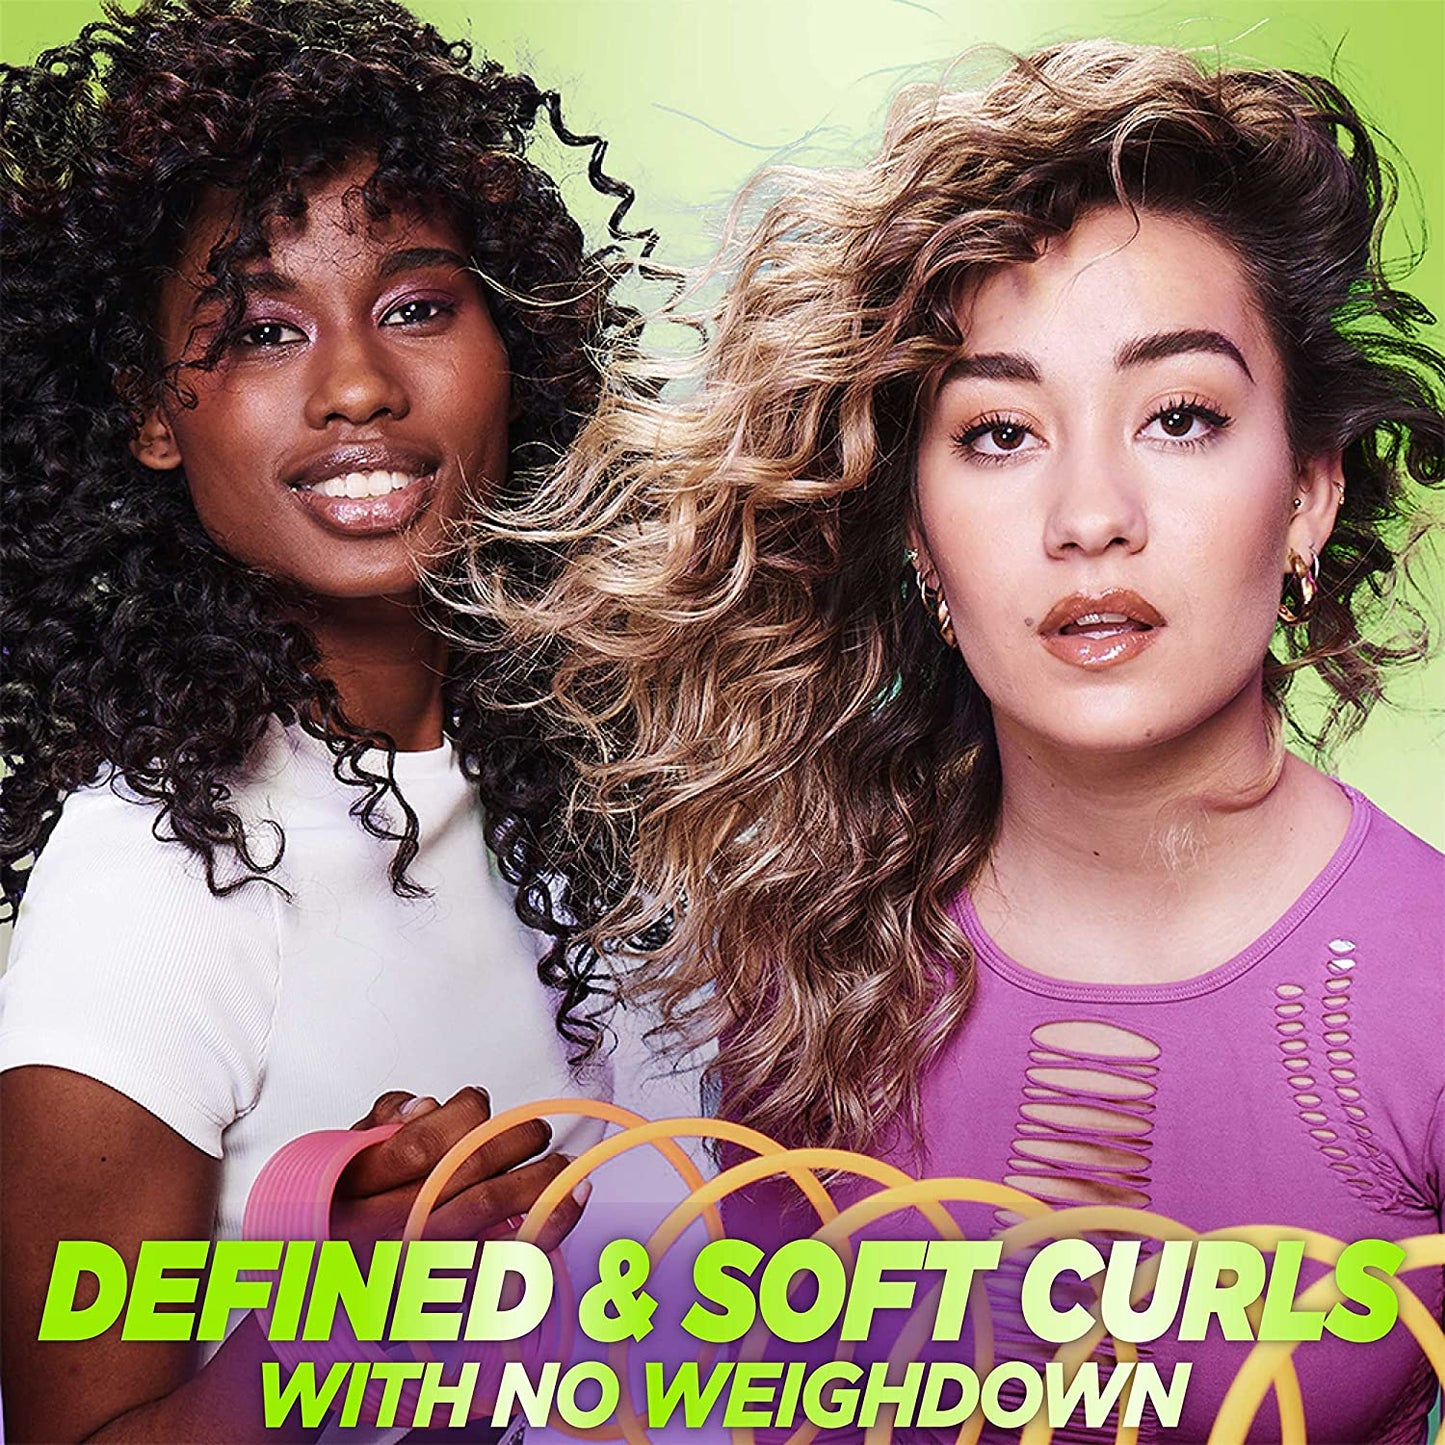 Garnier Fructis Style Curl Construct Creation Mousse with Shea Butter Extra Strong Hold 6.8 Oz(192g)